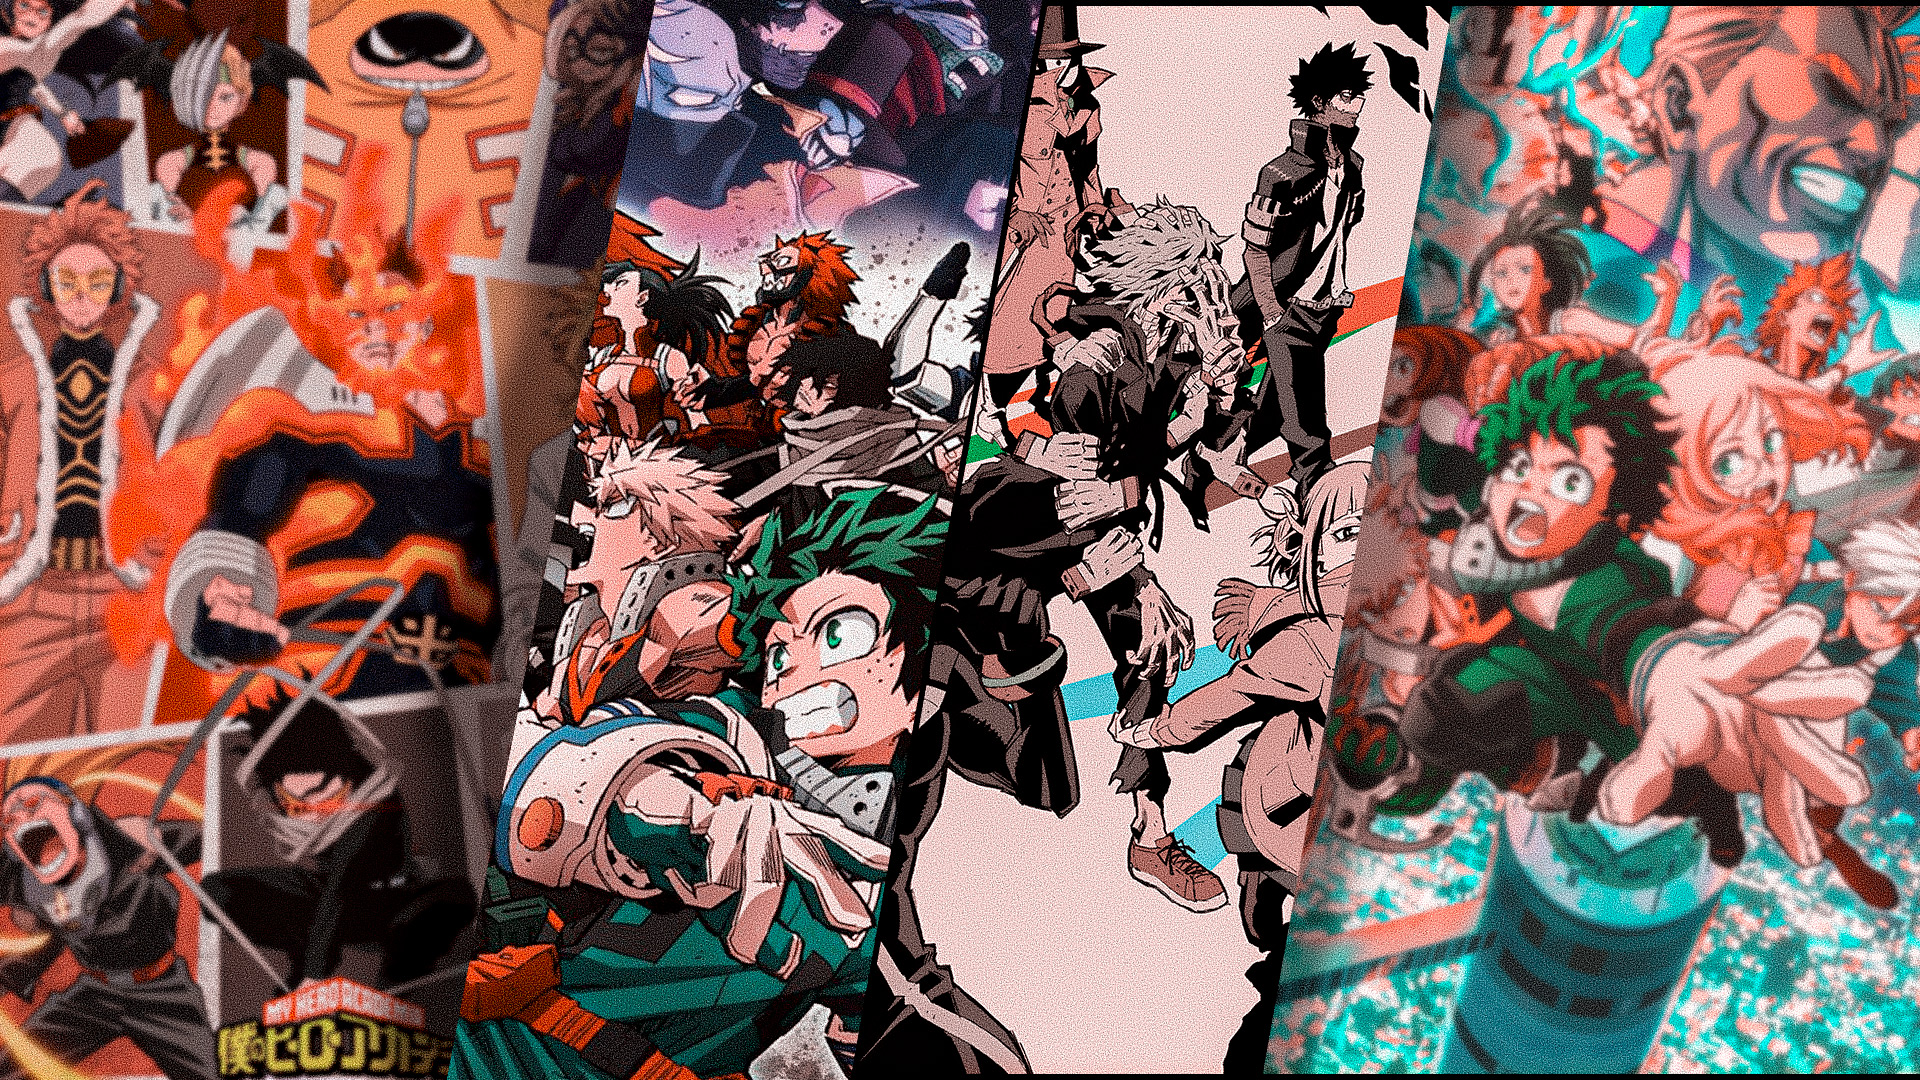 My Hero Academia Summer Anime Special Releases New Poster